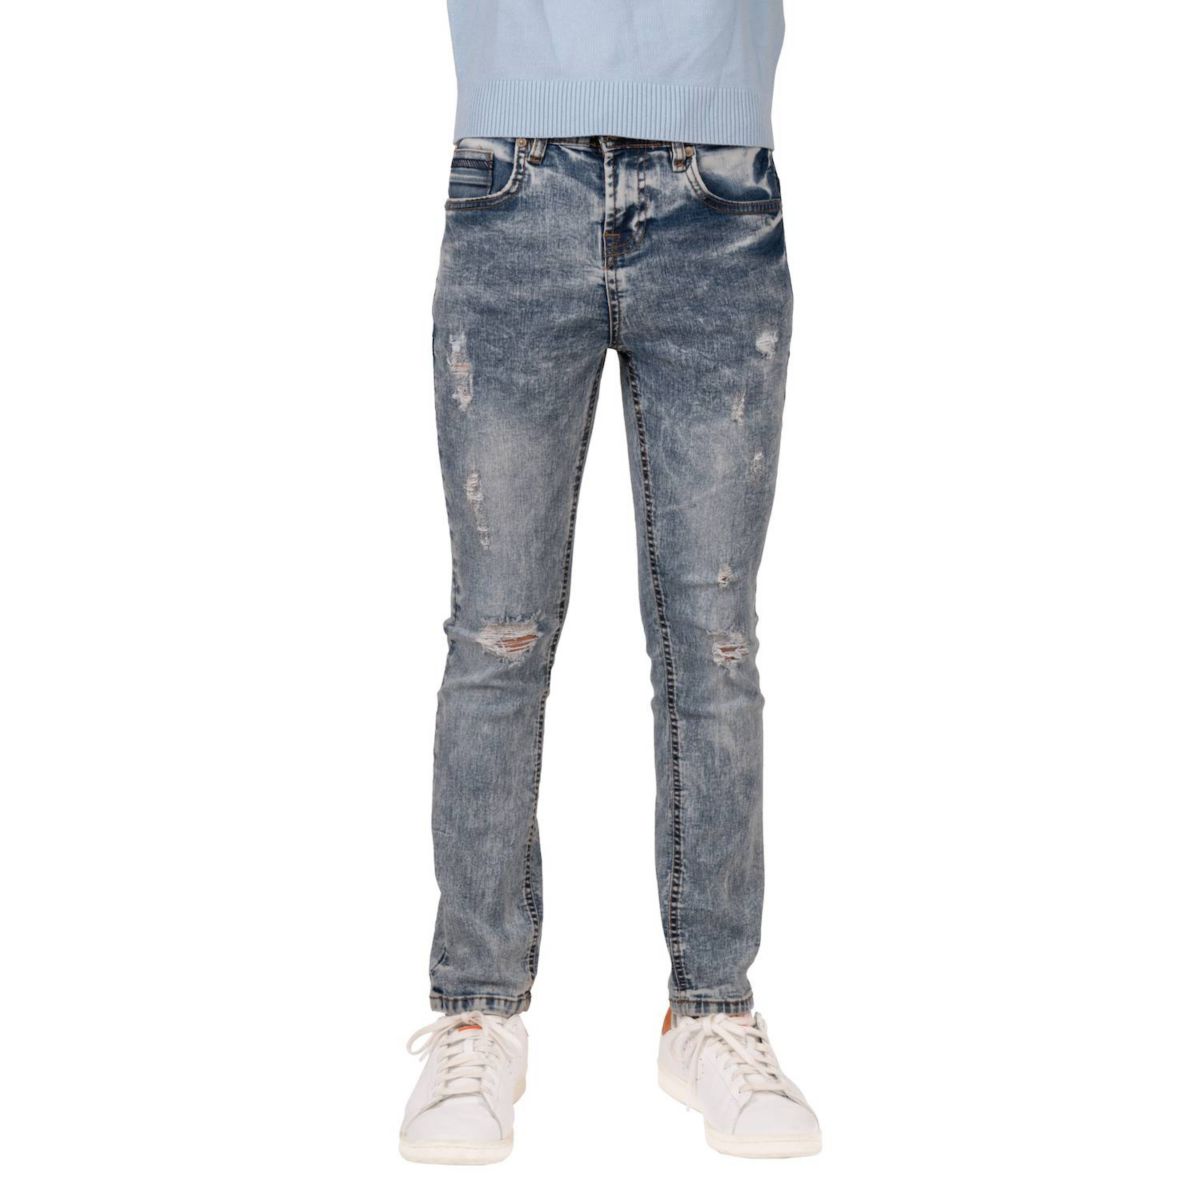 Boys 8-18 Fashion Rip & Repair Jeans With Details On Knee RawX